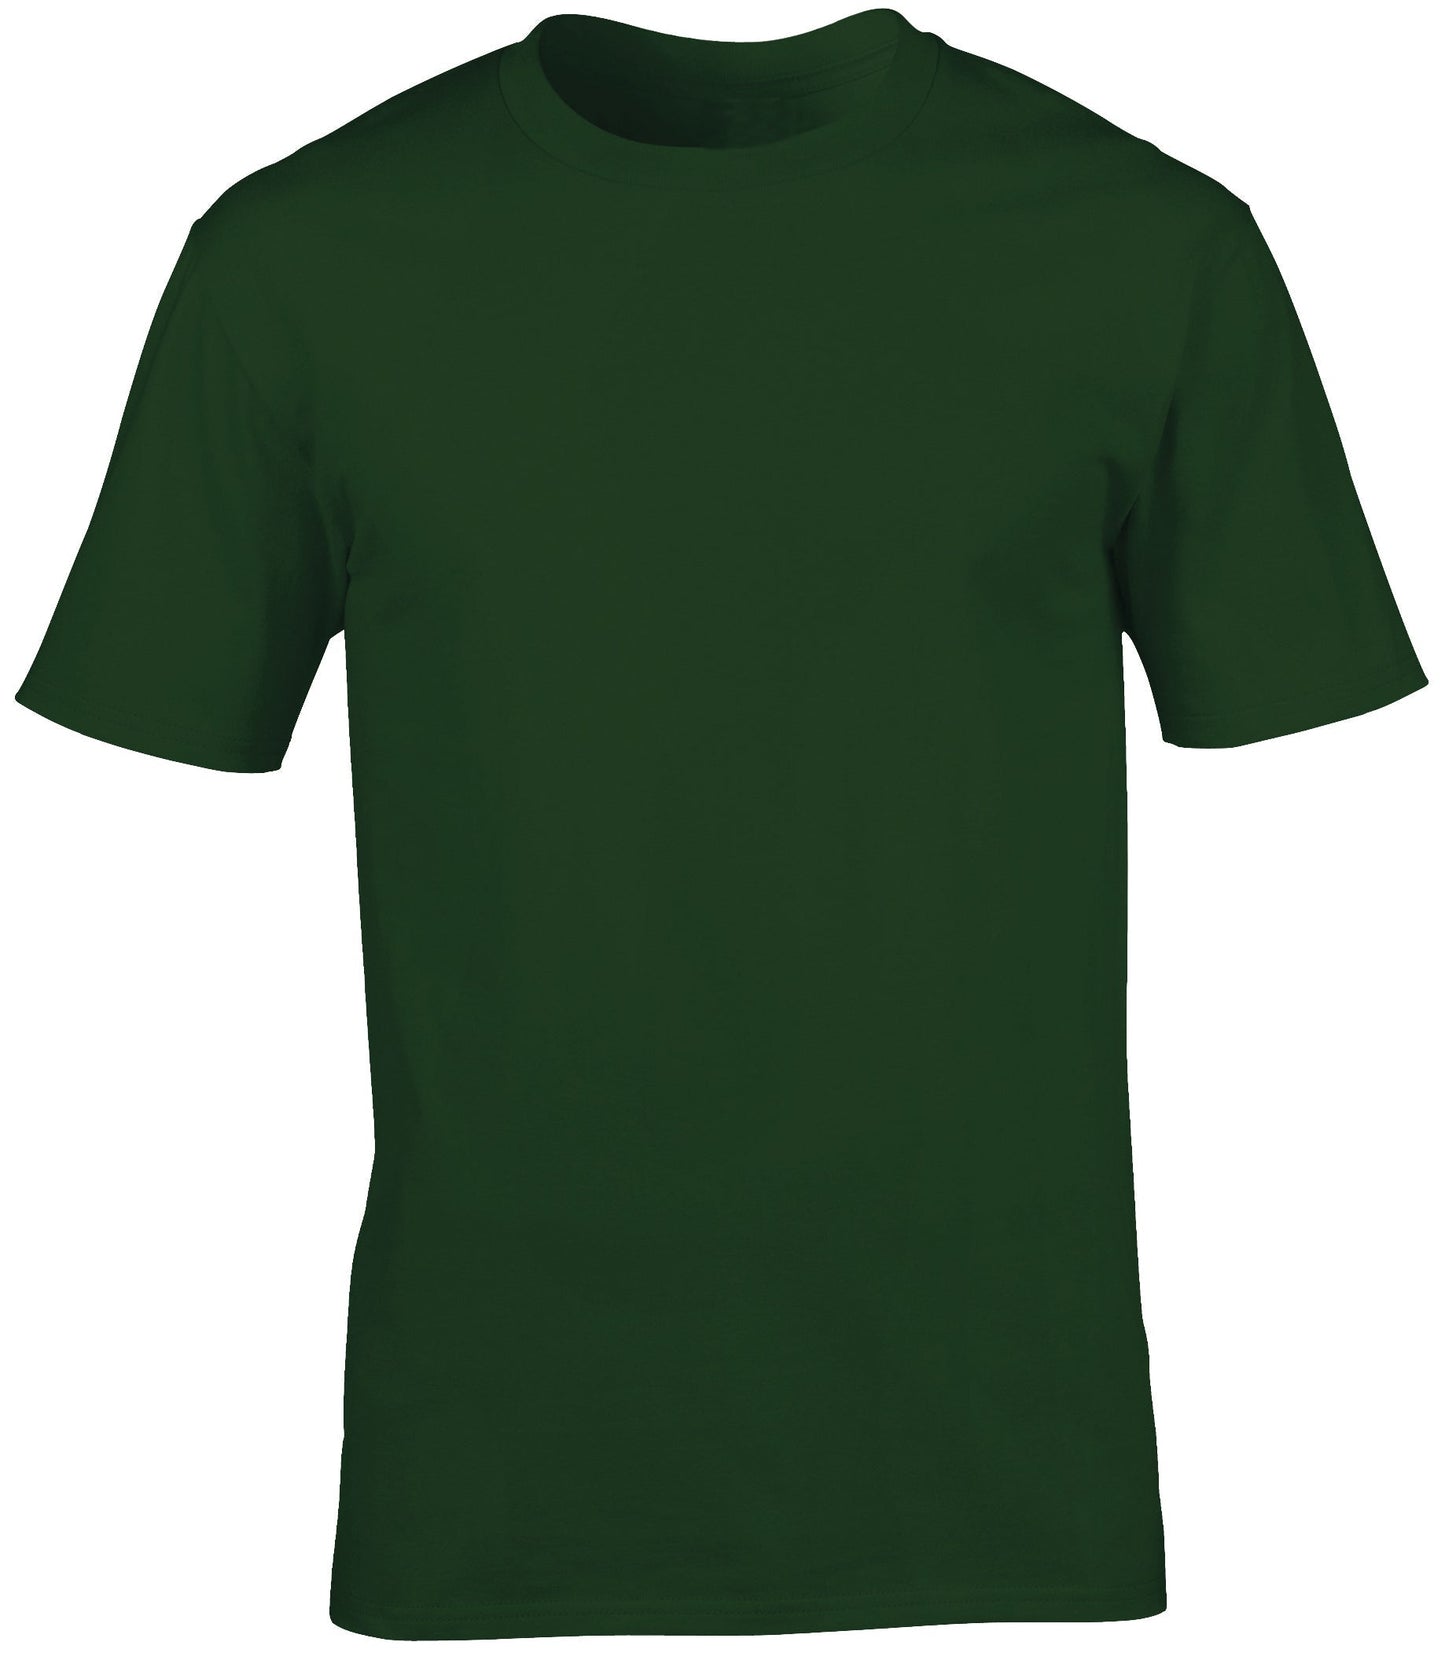 Your Logo Workwear Unisex T-shirt Save £3 per item when ordering 5 or more!